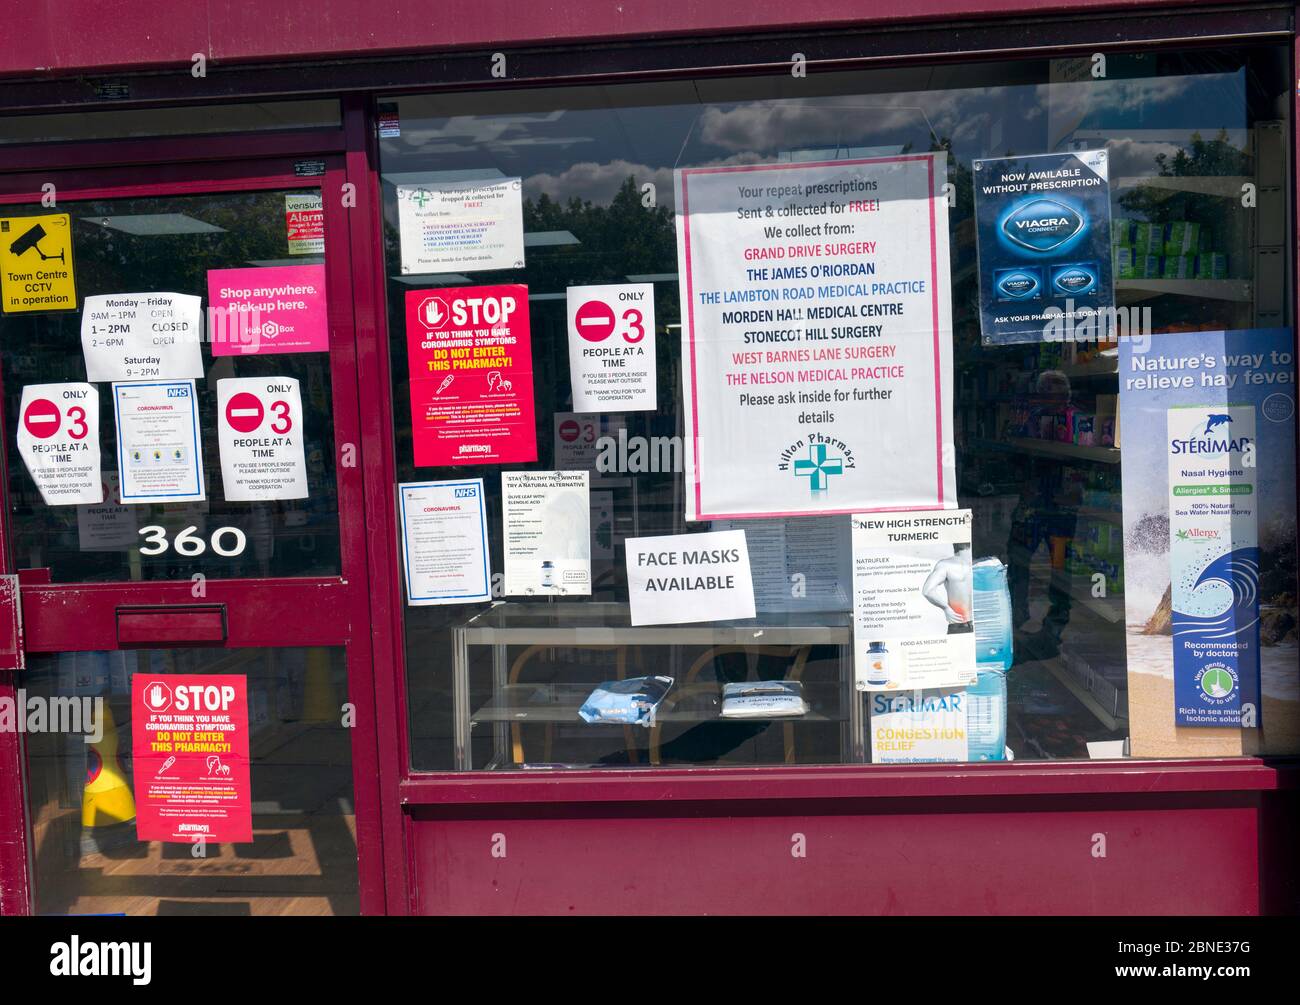 Chemist shop with multiple signage, posters, advising customers about accessing Covid-19 help. Stock Photo